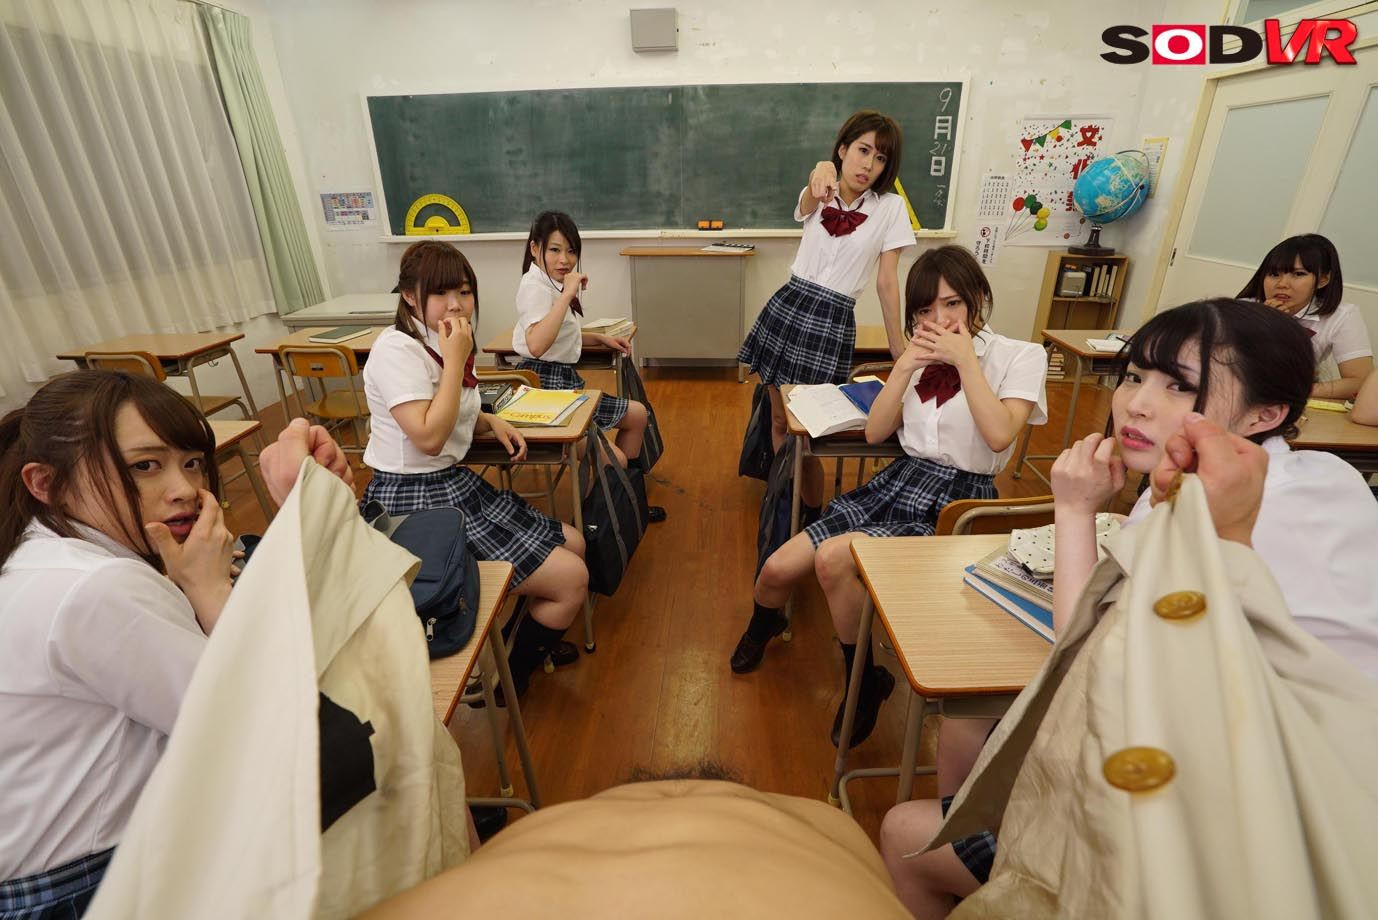 Exhibitionist VR: We Went to a School and Showed These Schoolgirls How to Masturbate with Our Cock! - Shy Schoolgirls Stripping and Watching you Masturbate JAV VR Slideshow